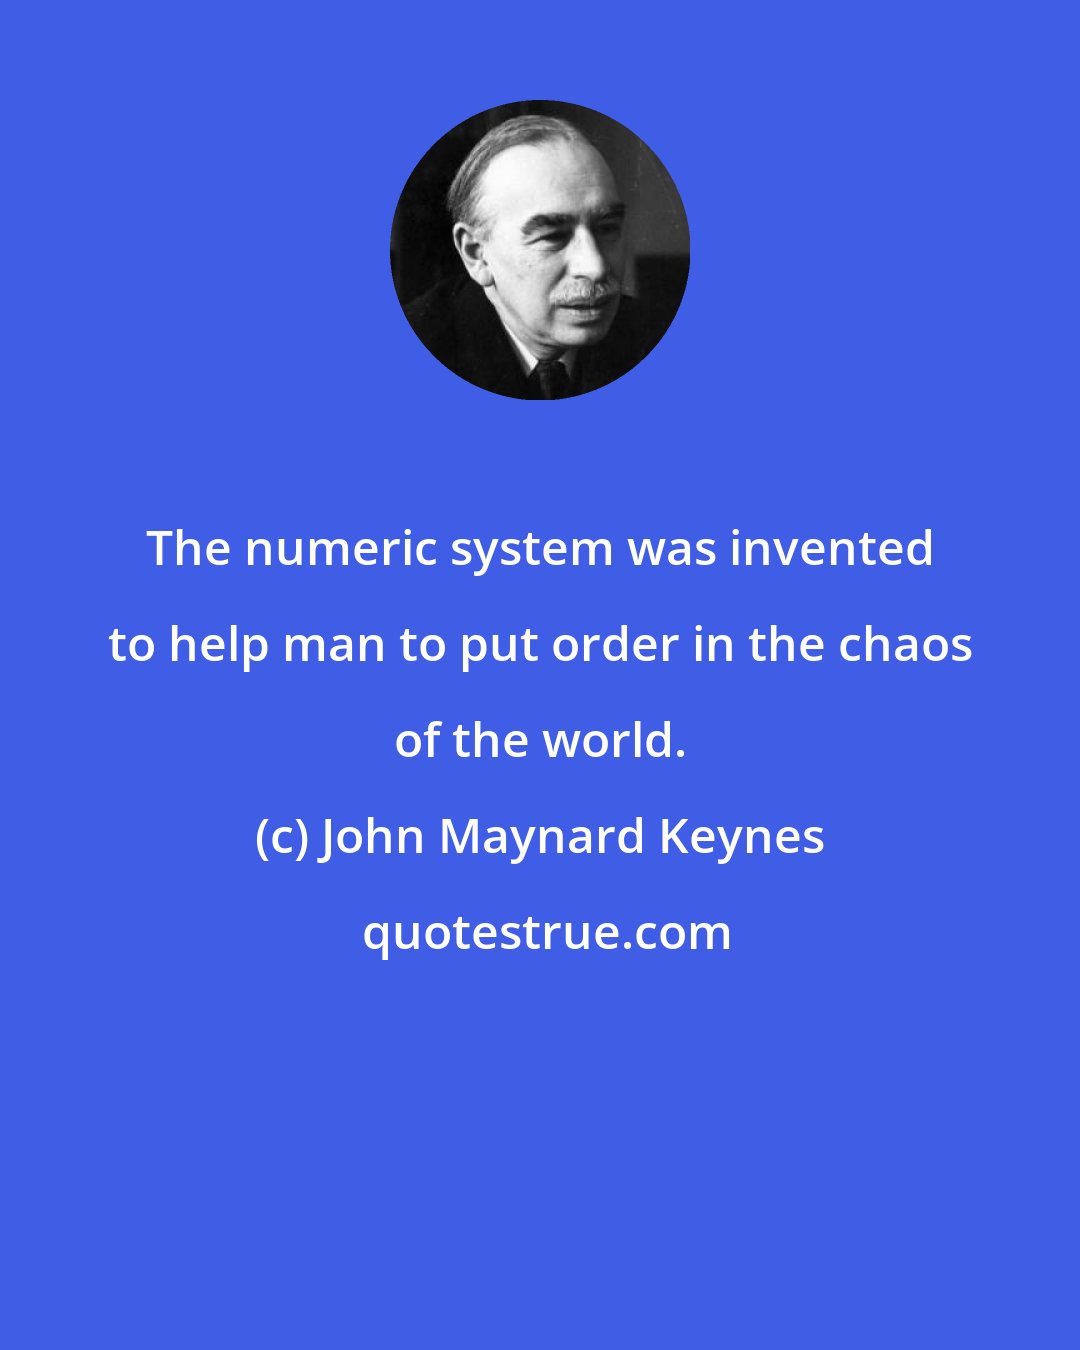 John Maynard Keynes: The numeric system was invented to help man to put order in the chaos of the world.